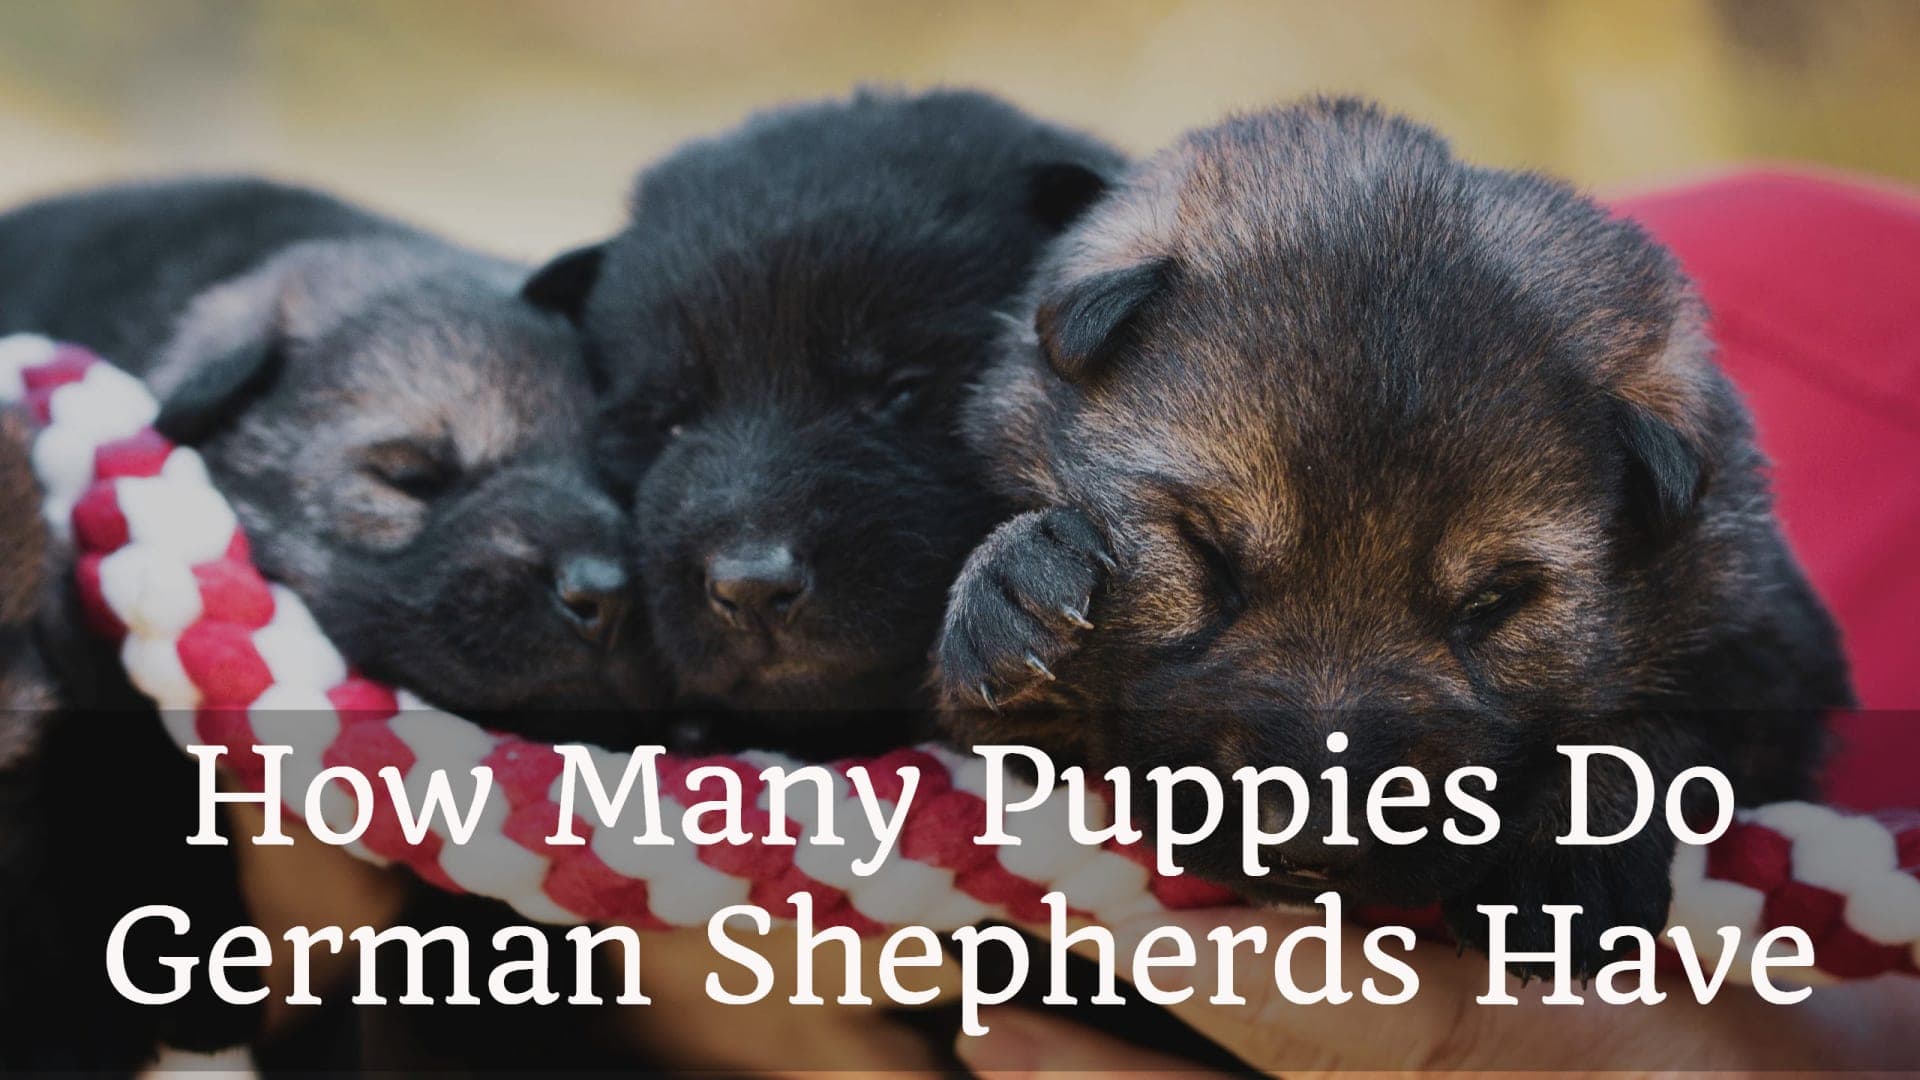 Revealed: How Many Puppies Do German Shepherds Have?